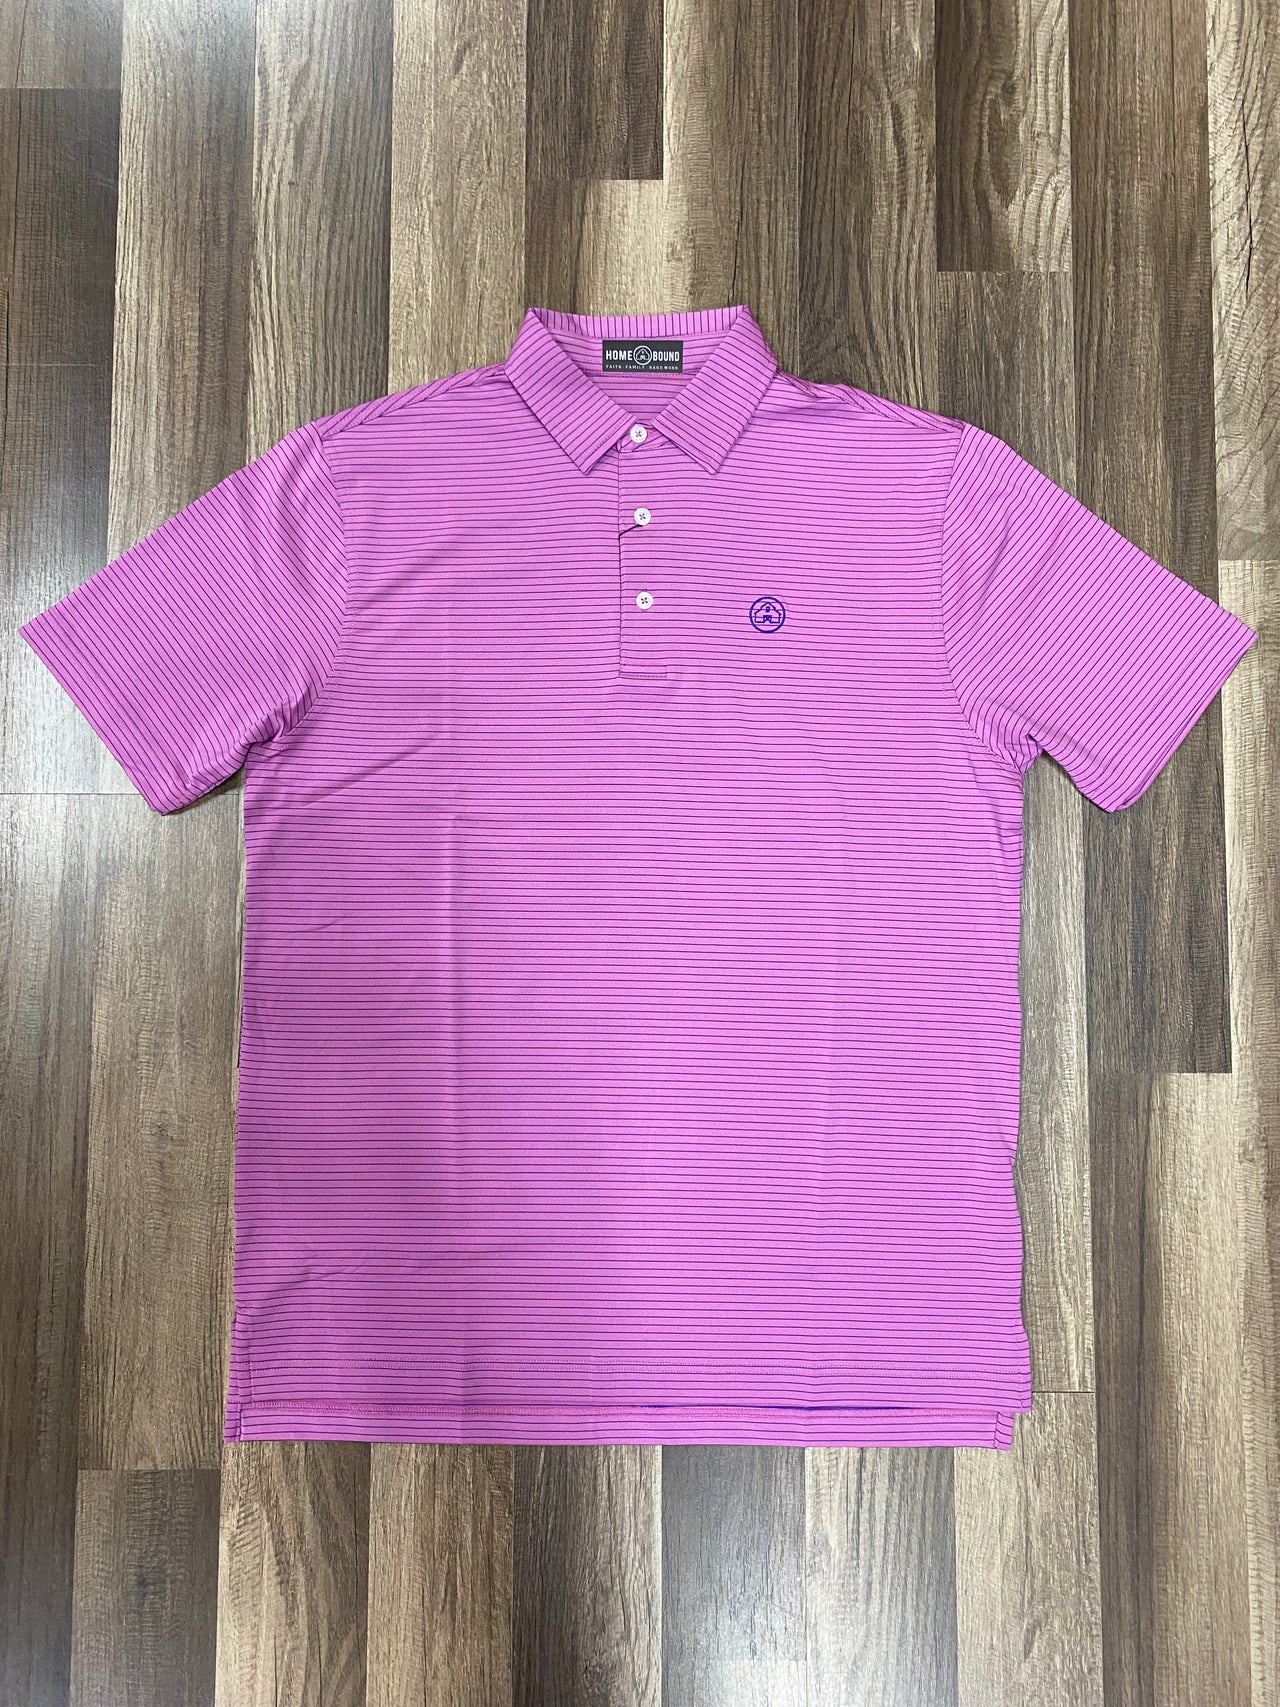 Home Bound Apparel Original Azalea Pink Performance Polo with Thin Cobalt Blue Stripes on a model showcasing vibrant style and comfortable fit for active lifestyles.